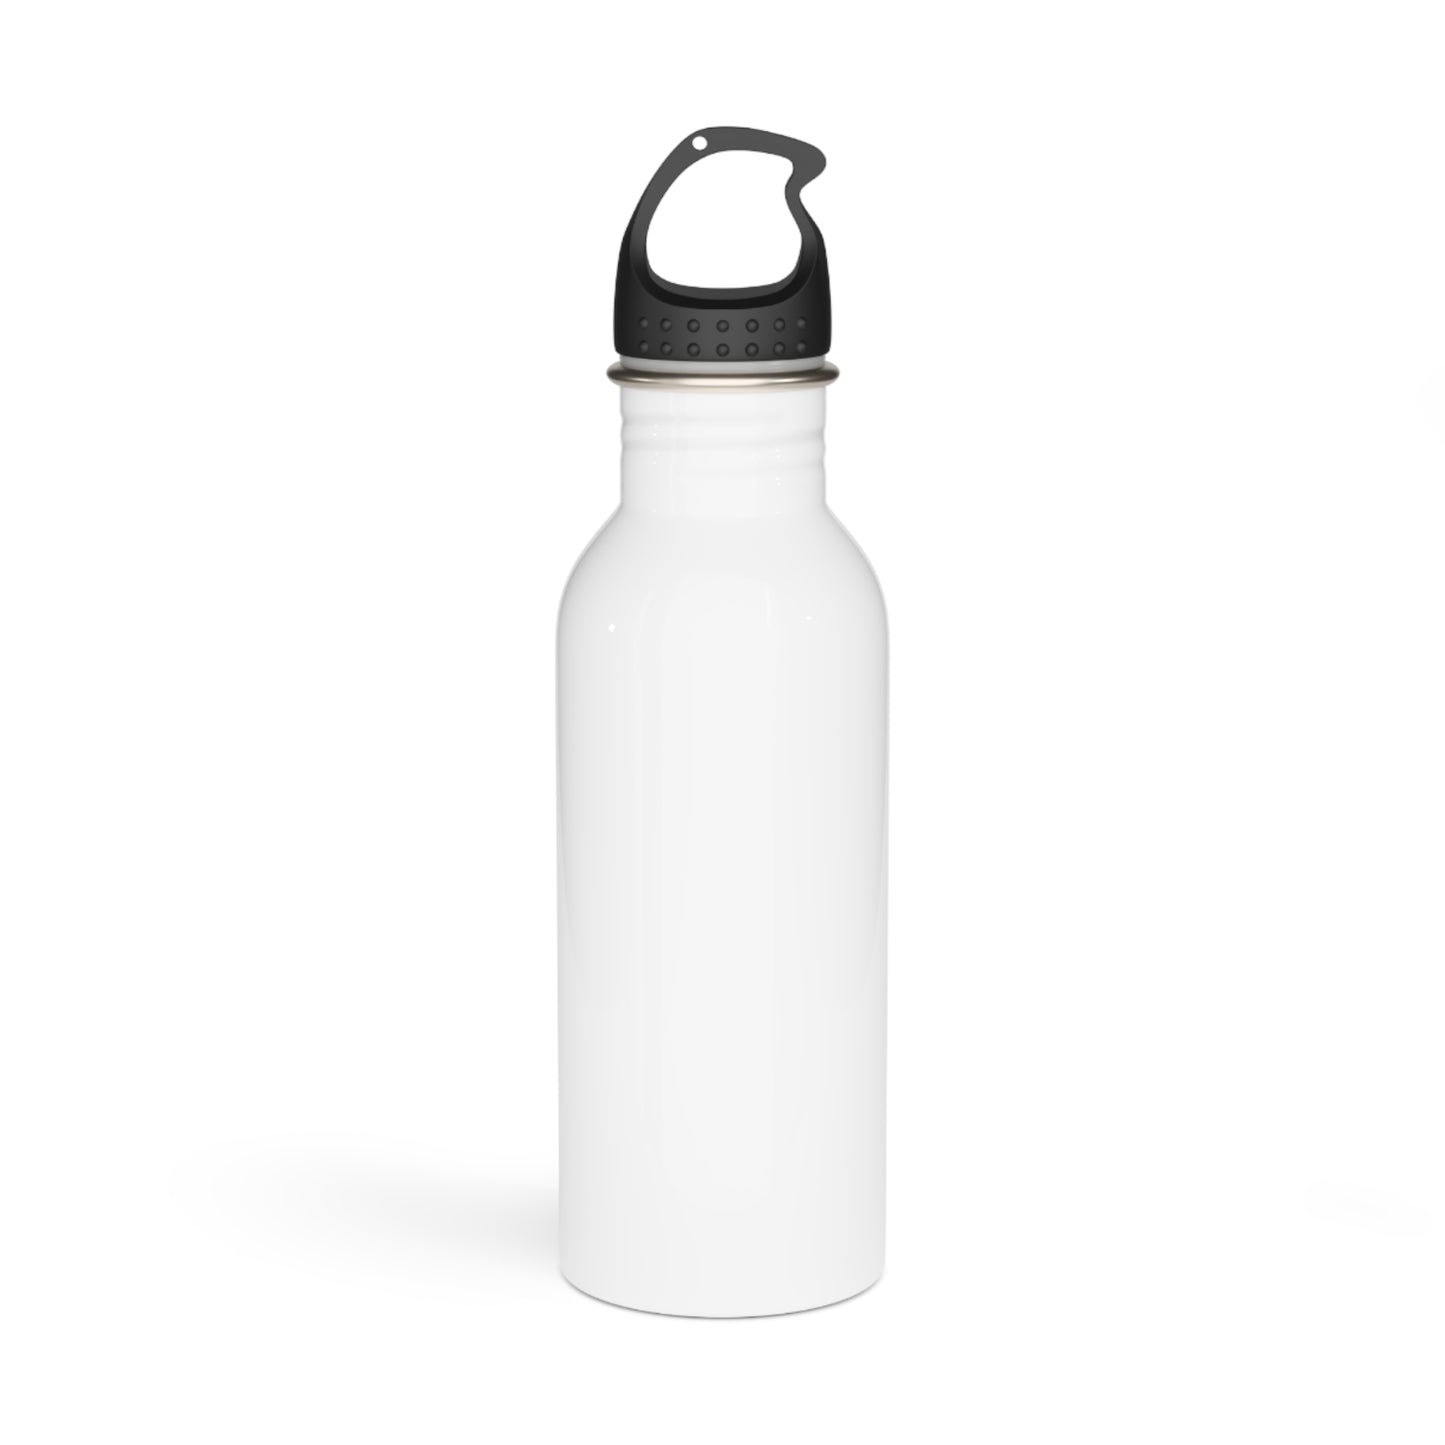 Thumbs Up - Stainless Steel Water Bottle